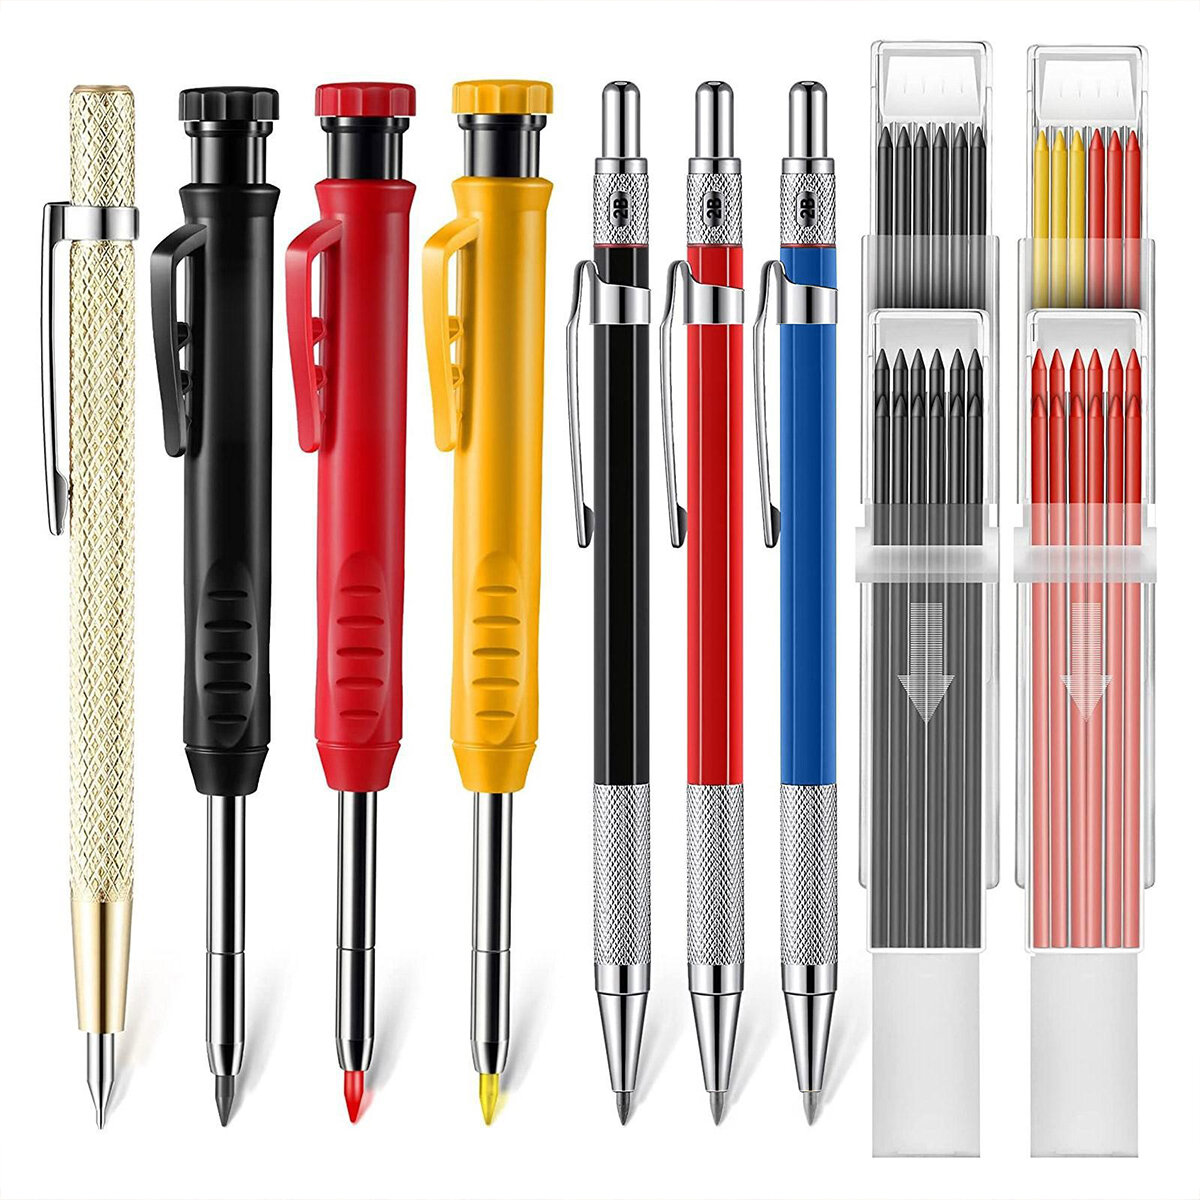 best price,carpenter,pencil,set,with,deep,hole,marker,coupon,price,discount